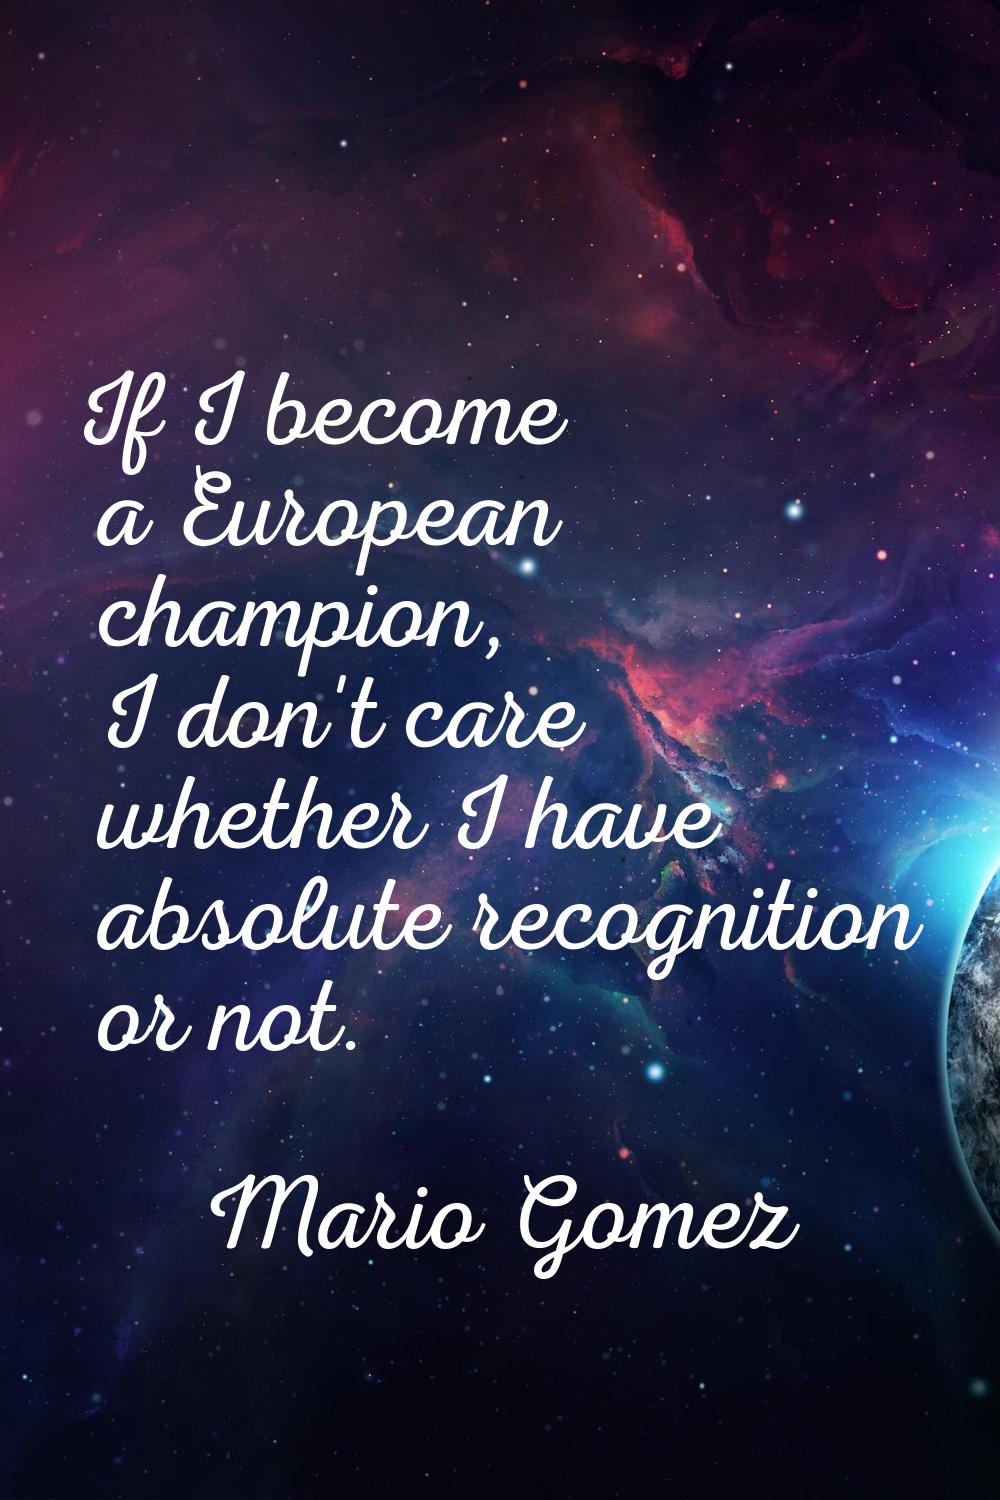 If I become a European champion, I don't care whether I have absolute recognition or not.